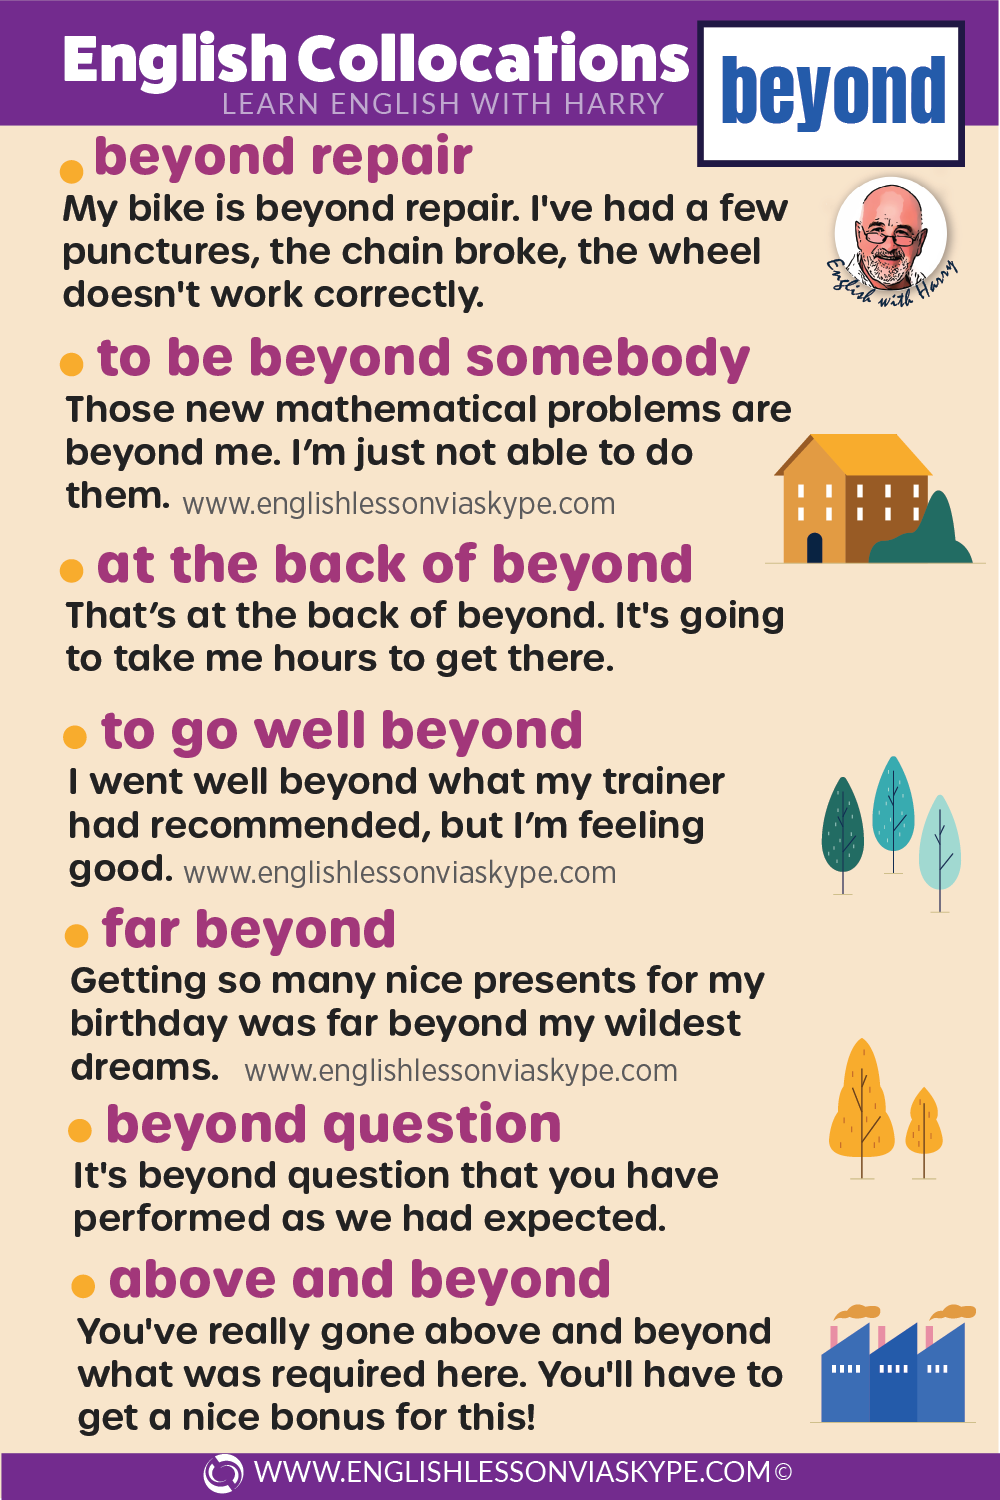 Learn English collocations with beyond. Meanings and examples. Advanced English learning. Online English lessons on Zoom, #learnenglish #englishlessons #EnglishTeacher #vocabulary #ingles #อังกฤษ #английский #aprenderingles #english